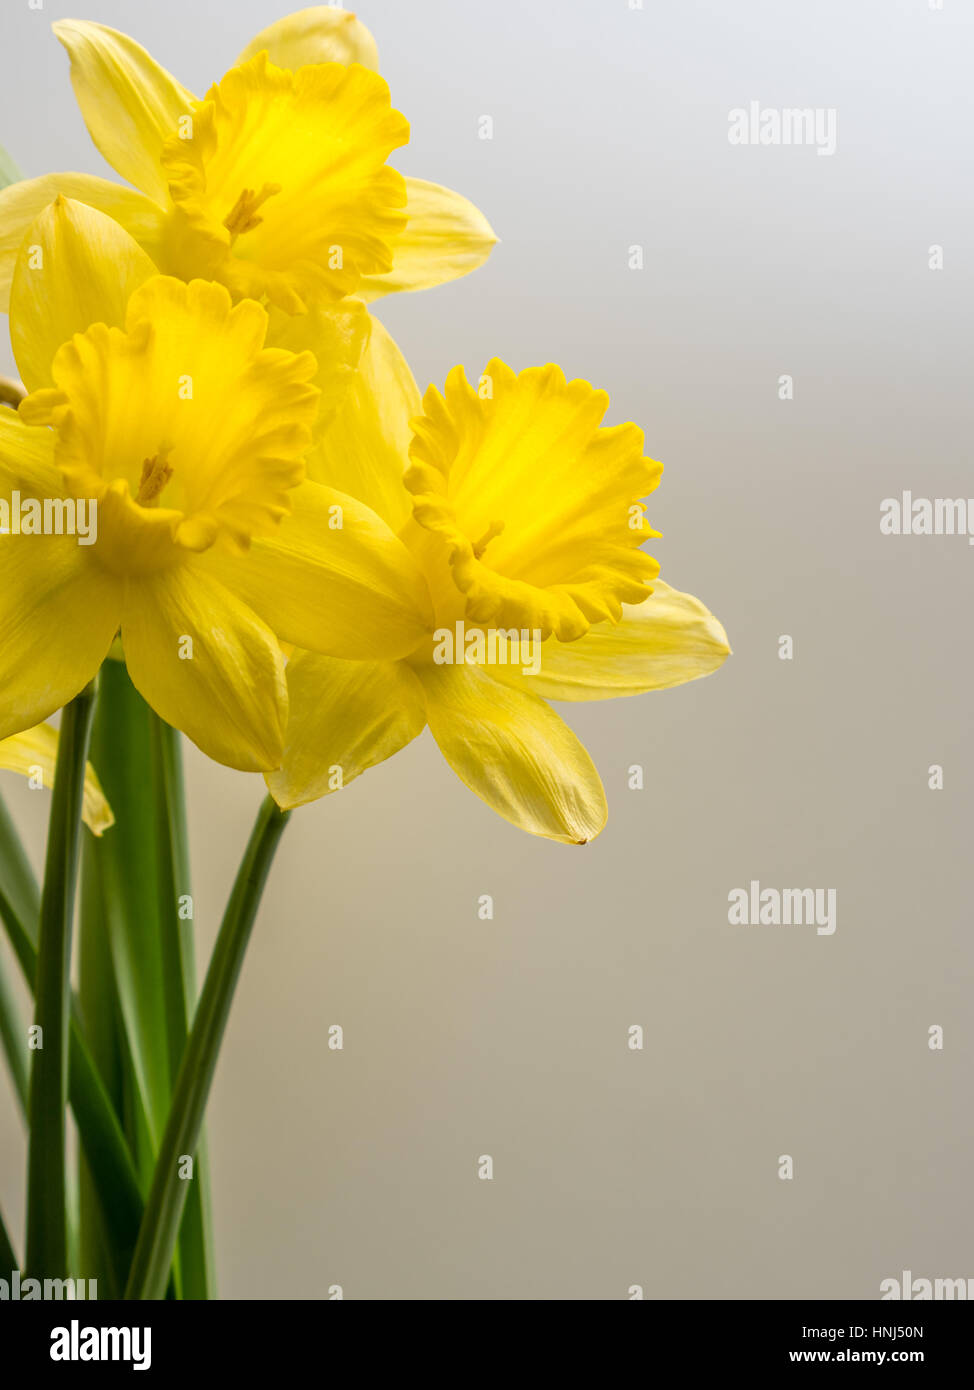 Bunch of daffodils on a white background Stock Photo